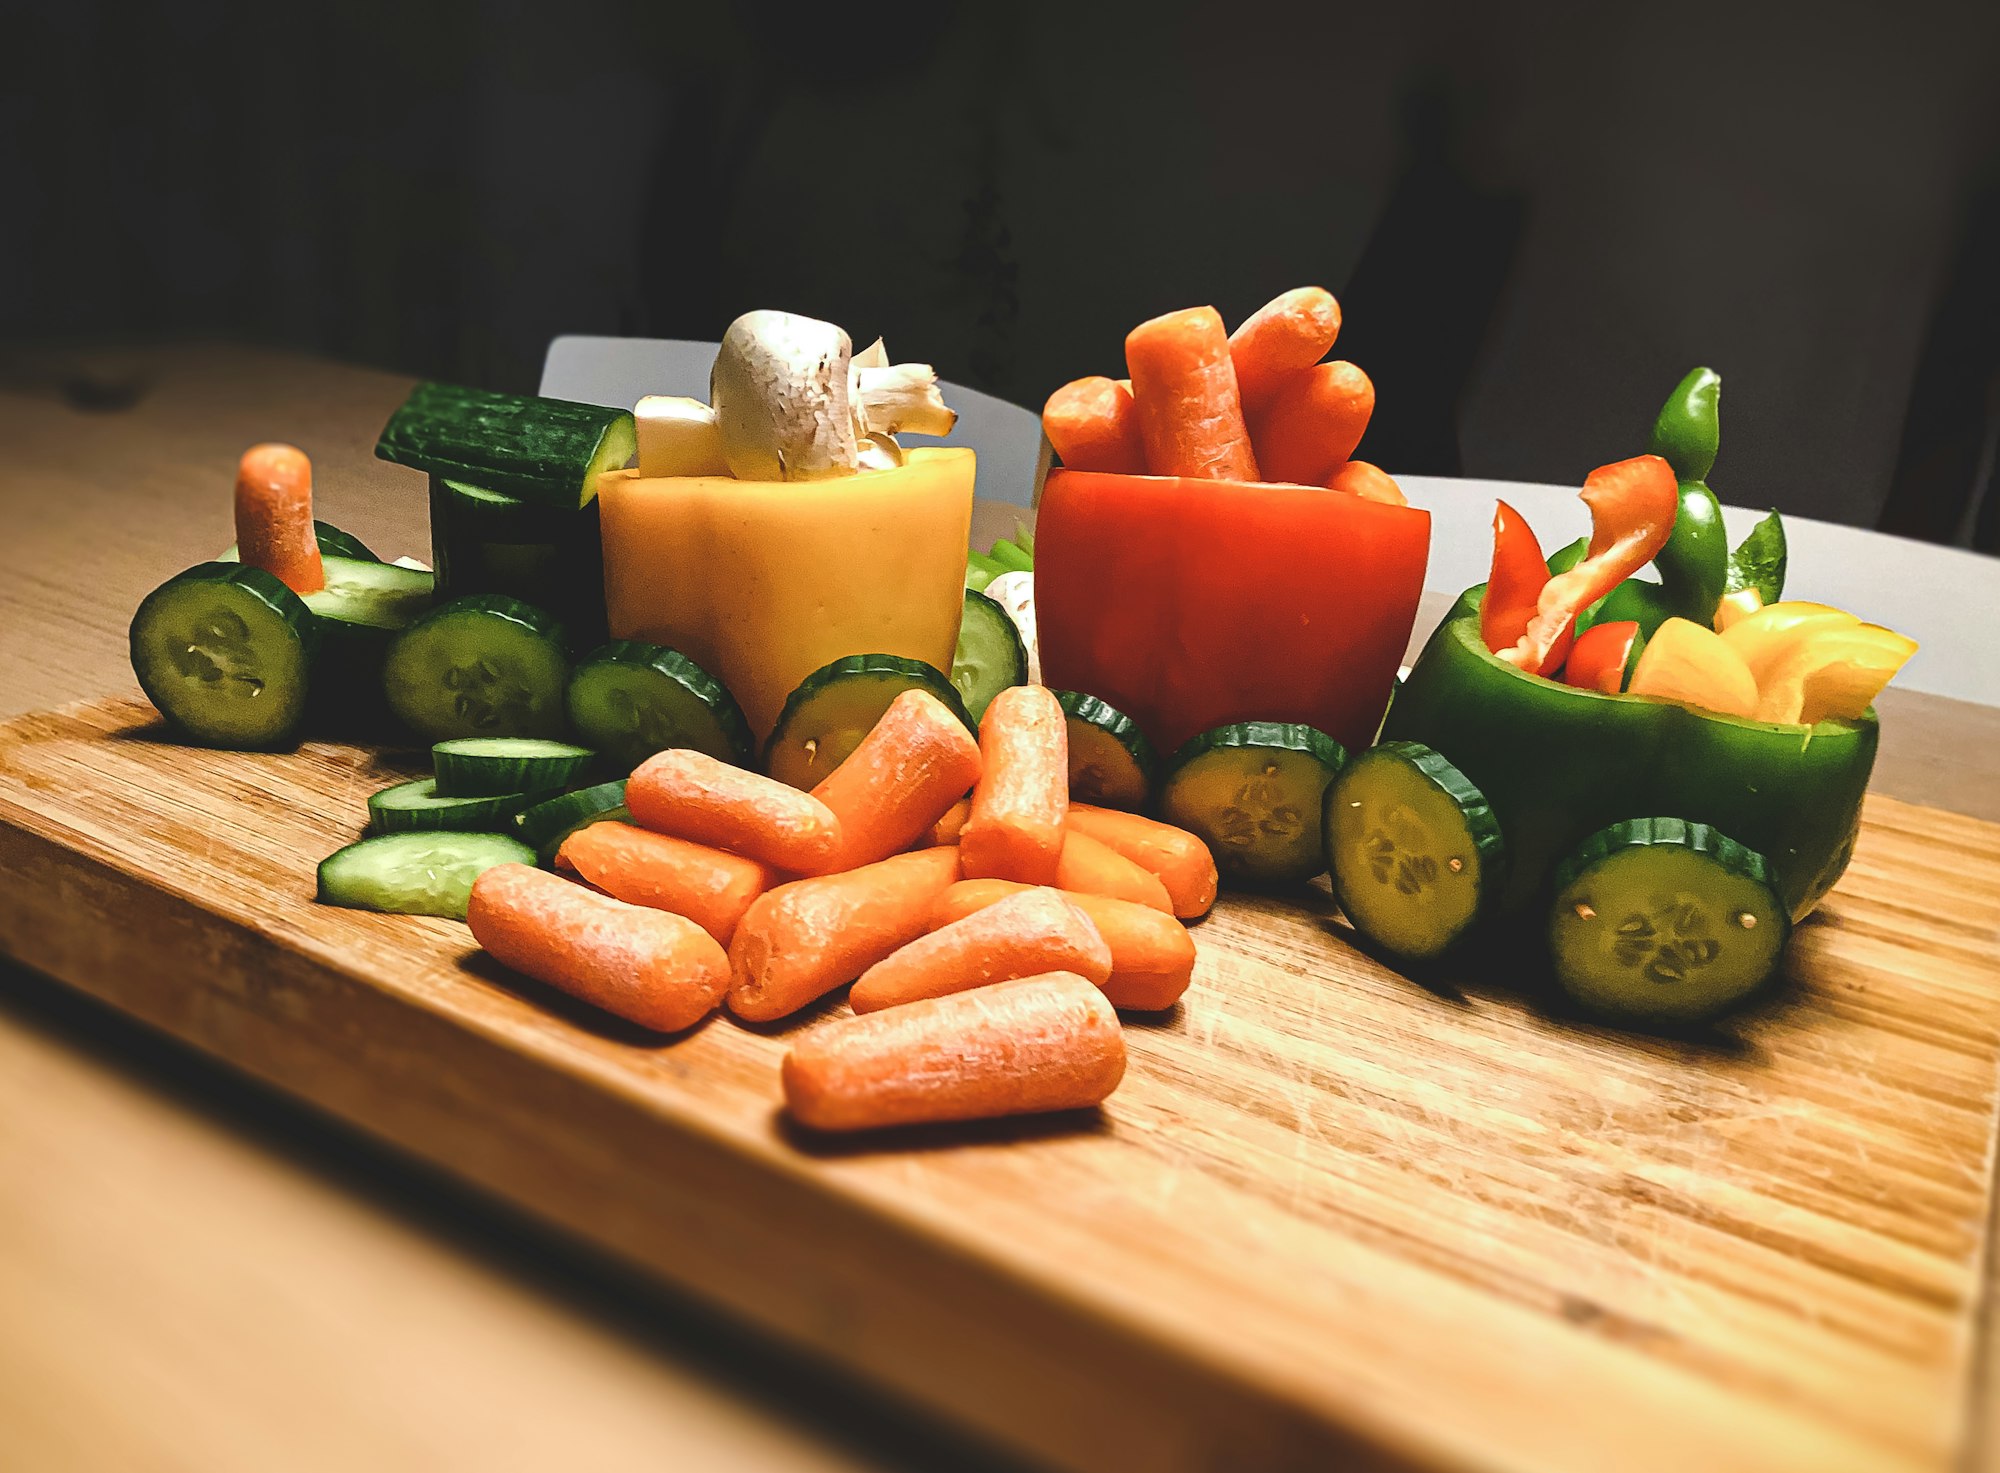 a model train made of vegetables